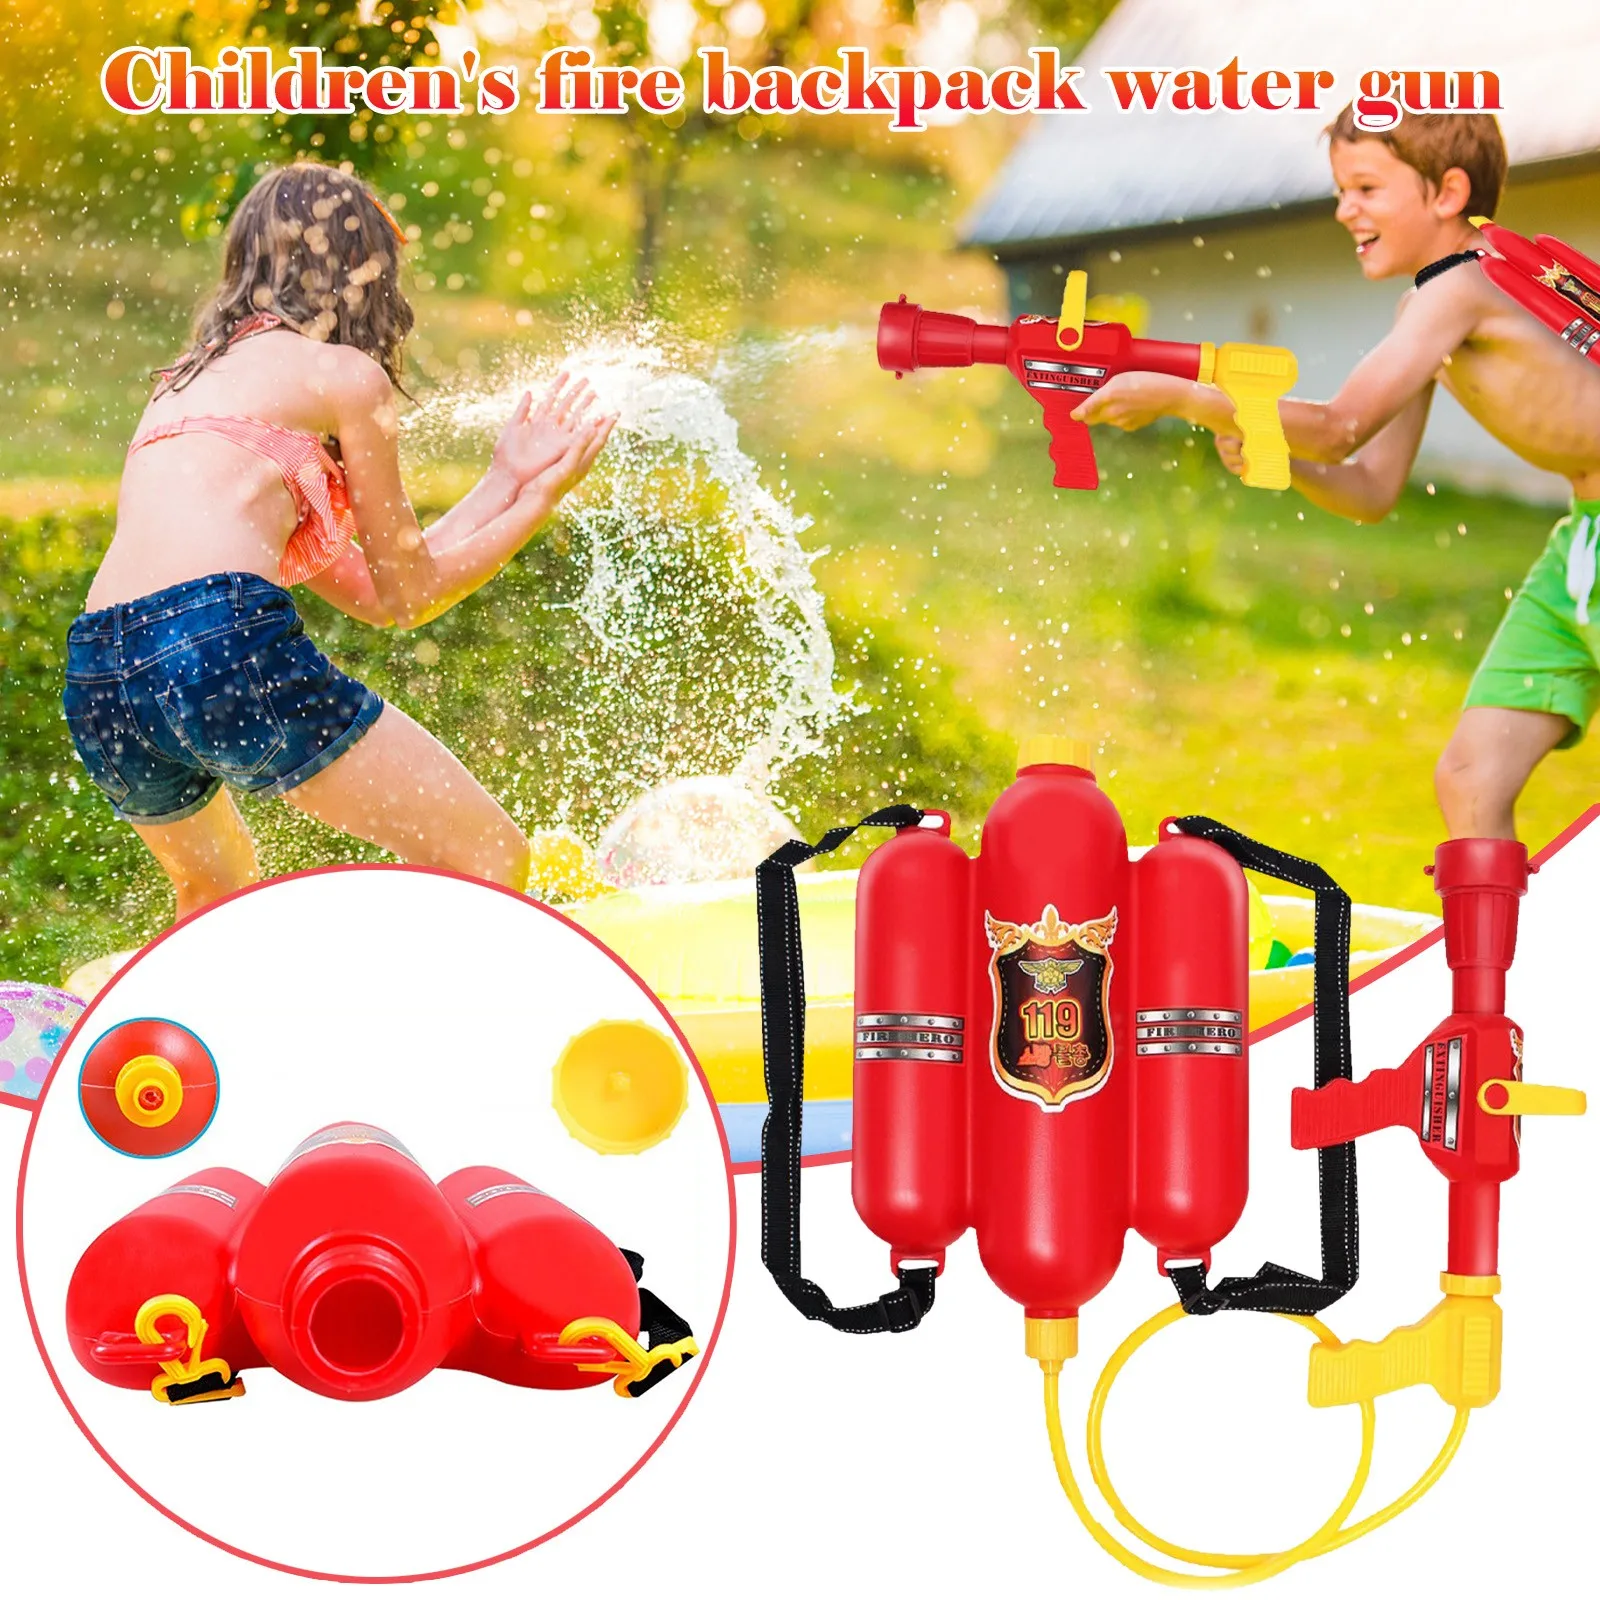 

Fireman Backpack Water Shooter-Blaster Water Guns Beach Toy and Outdoor Kids Gift